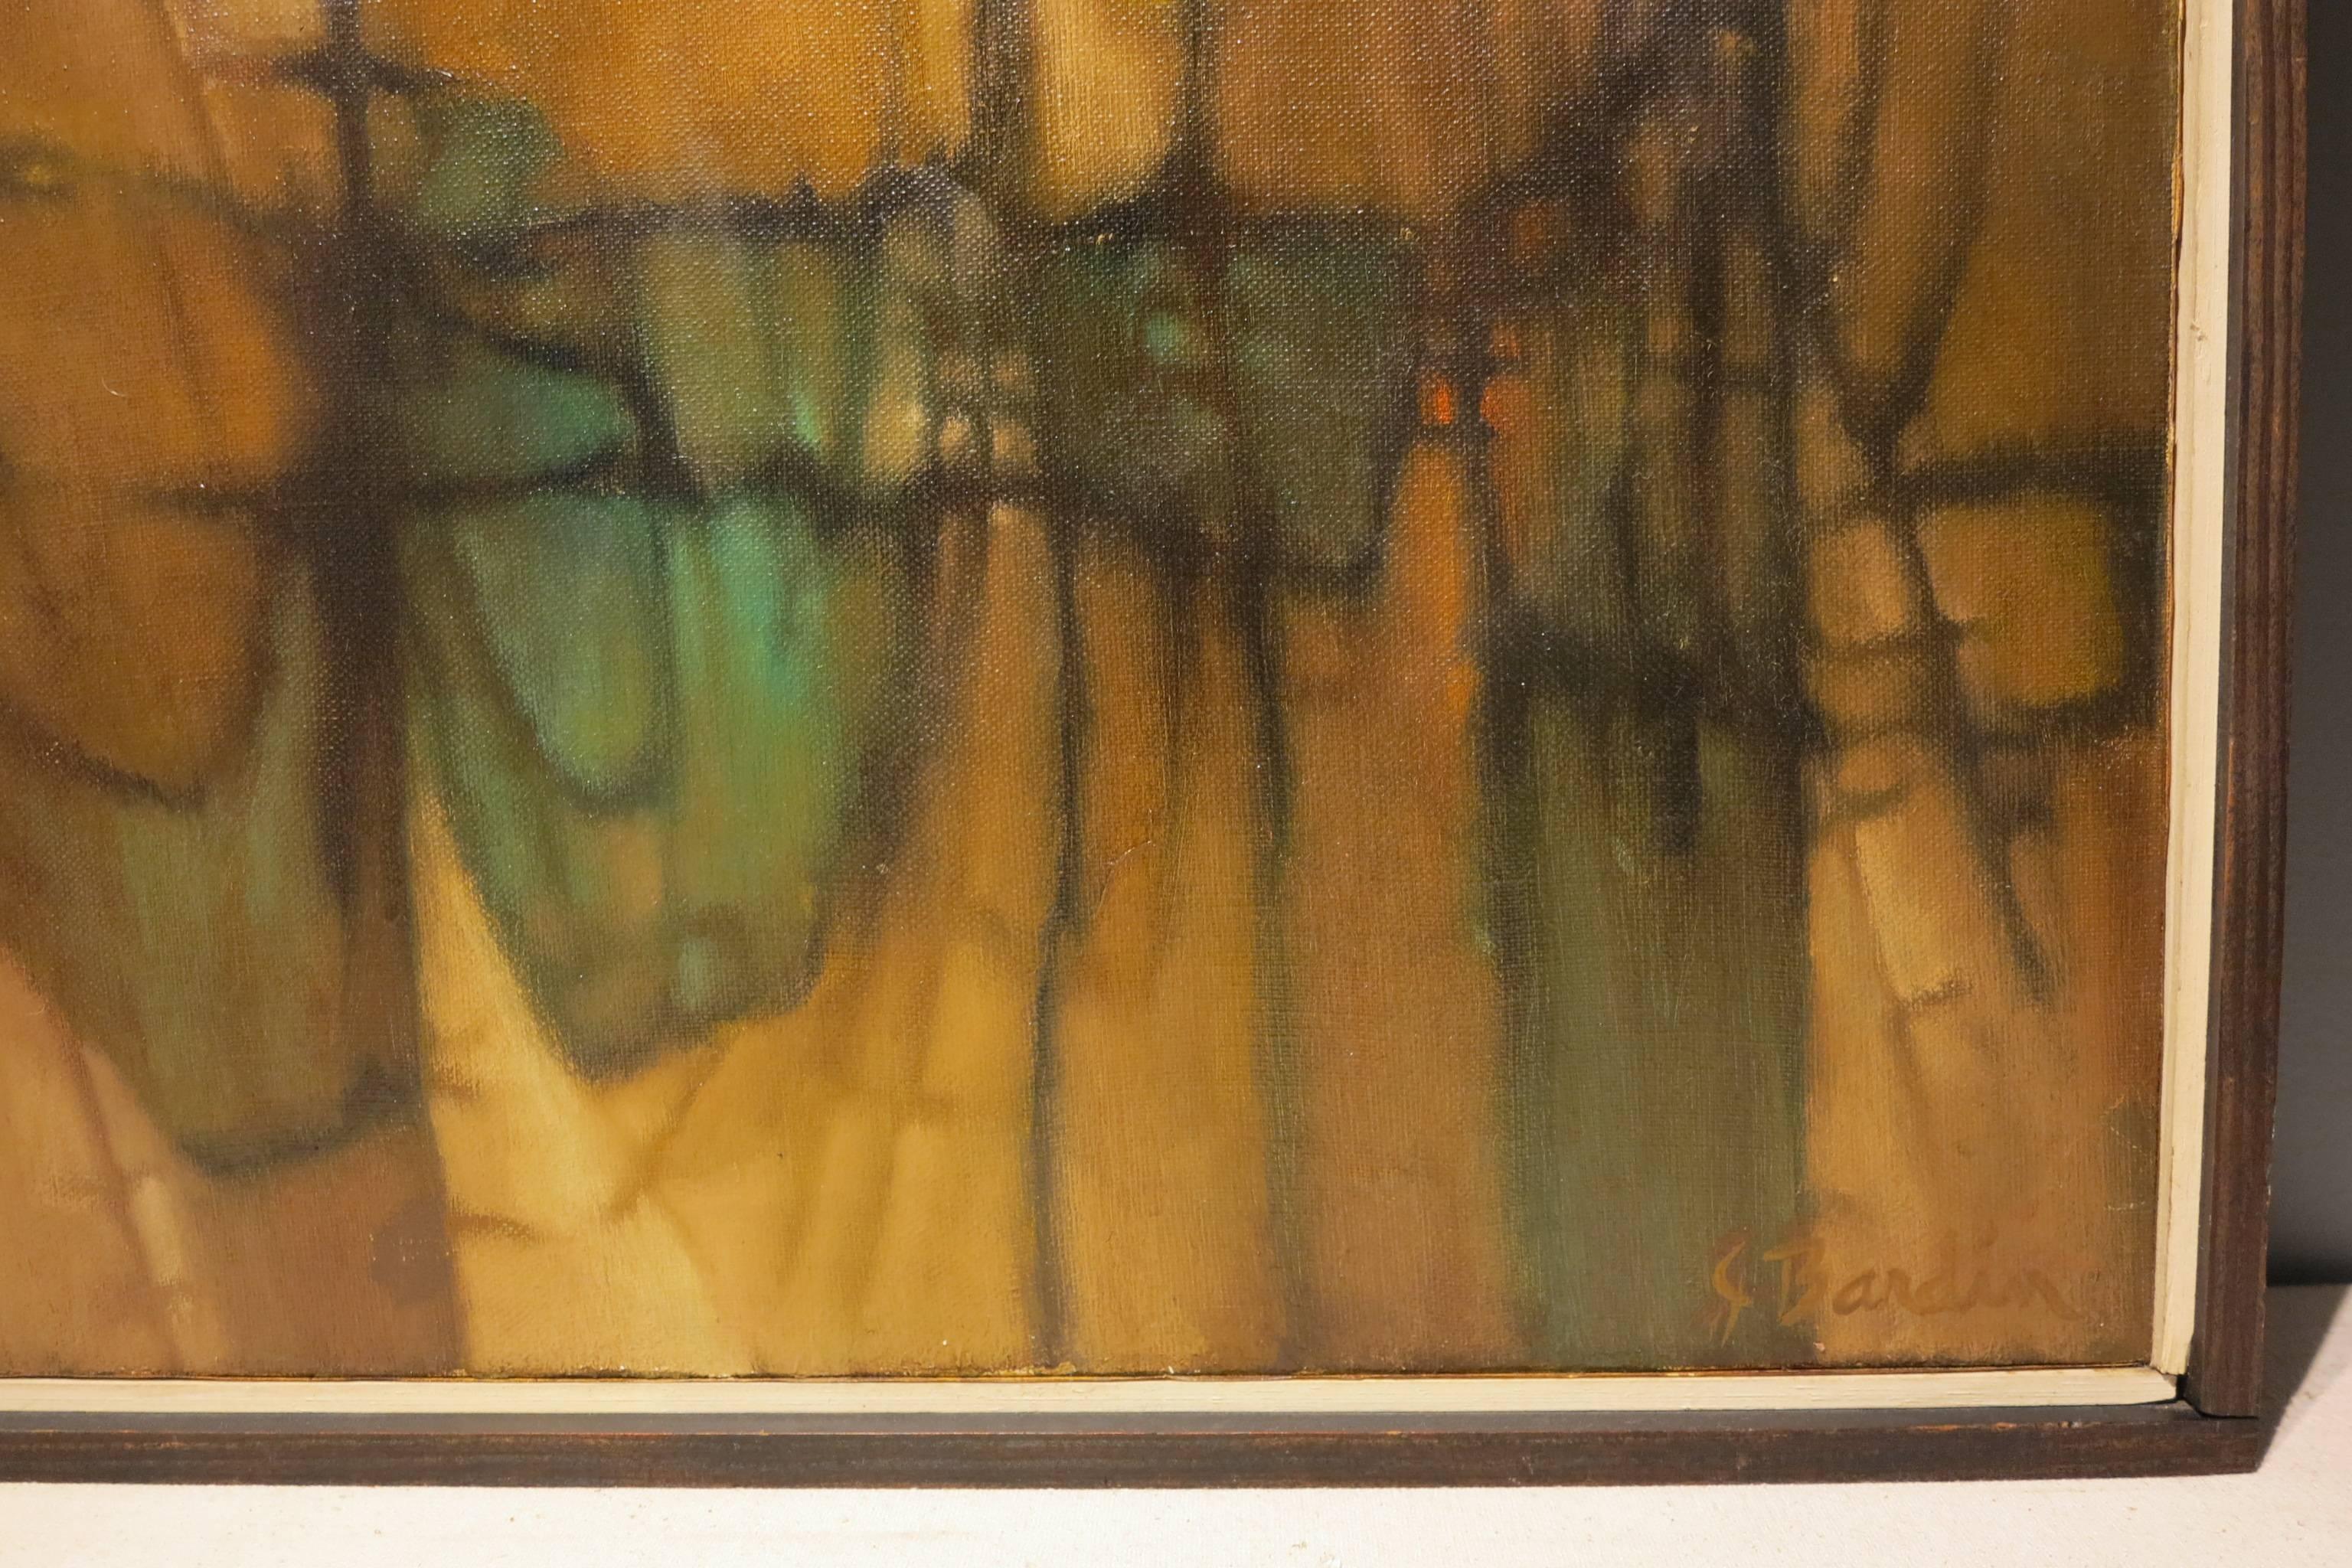 Beautiful abstract expressionist painting by South Carolina artist, Jesse Redwin Bardin (1923-1997). Oil on canvas measures 21 x 34 inches; 22 x 35 inches in original frame. Signed lower right. Two areas of repair to canvas indicated by patches en